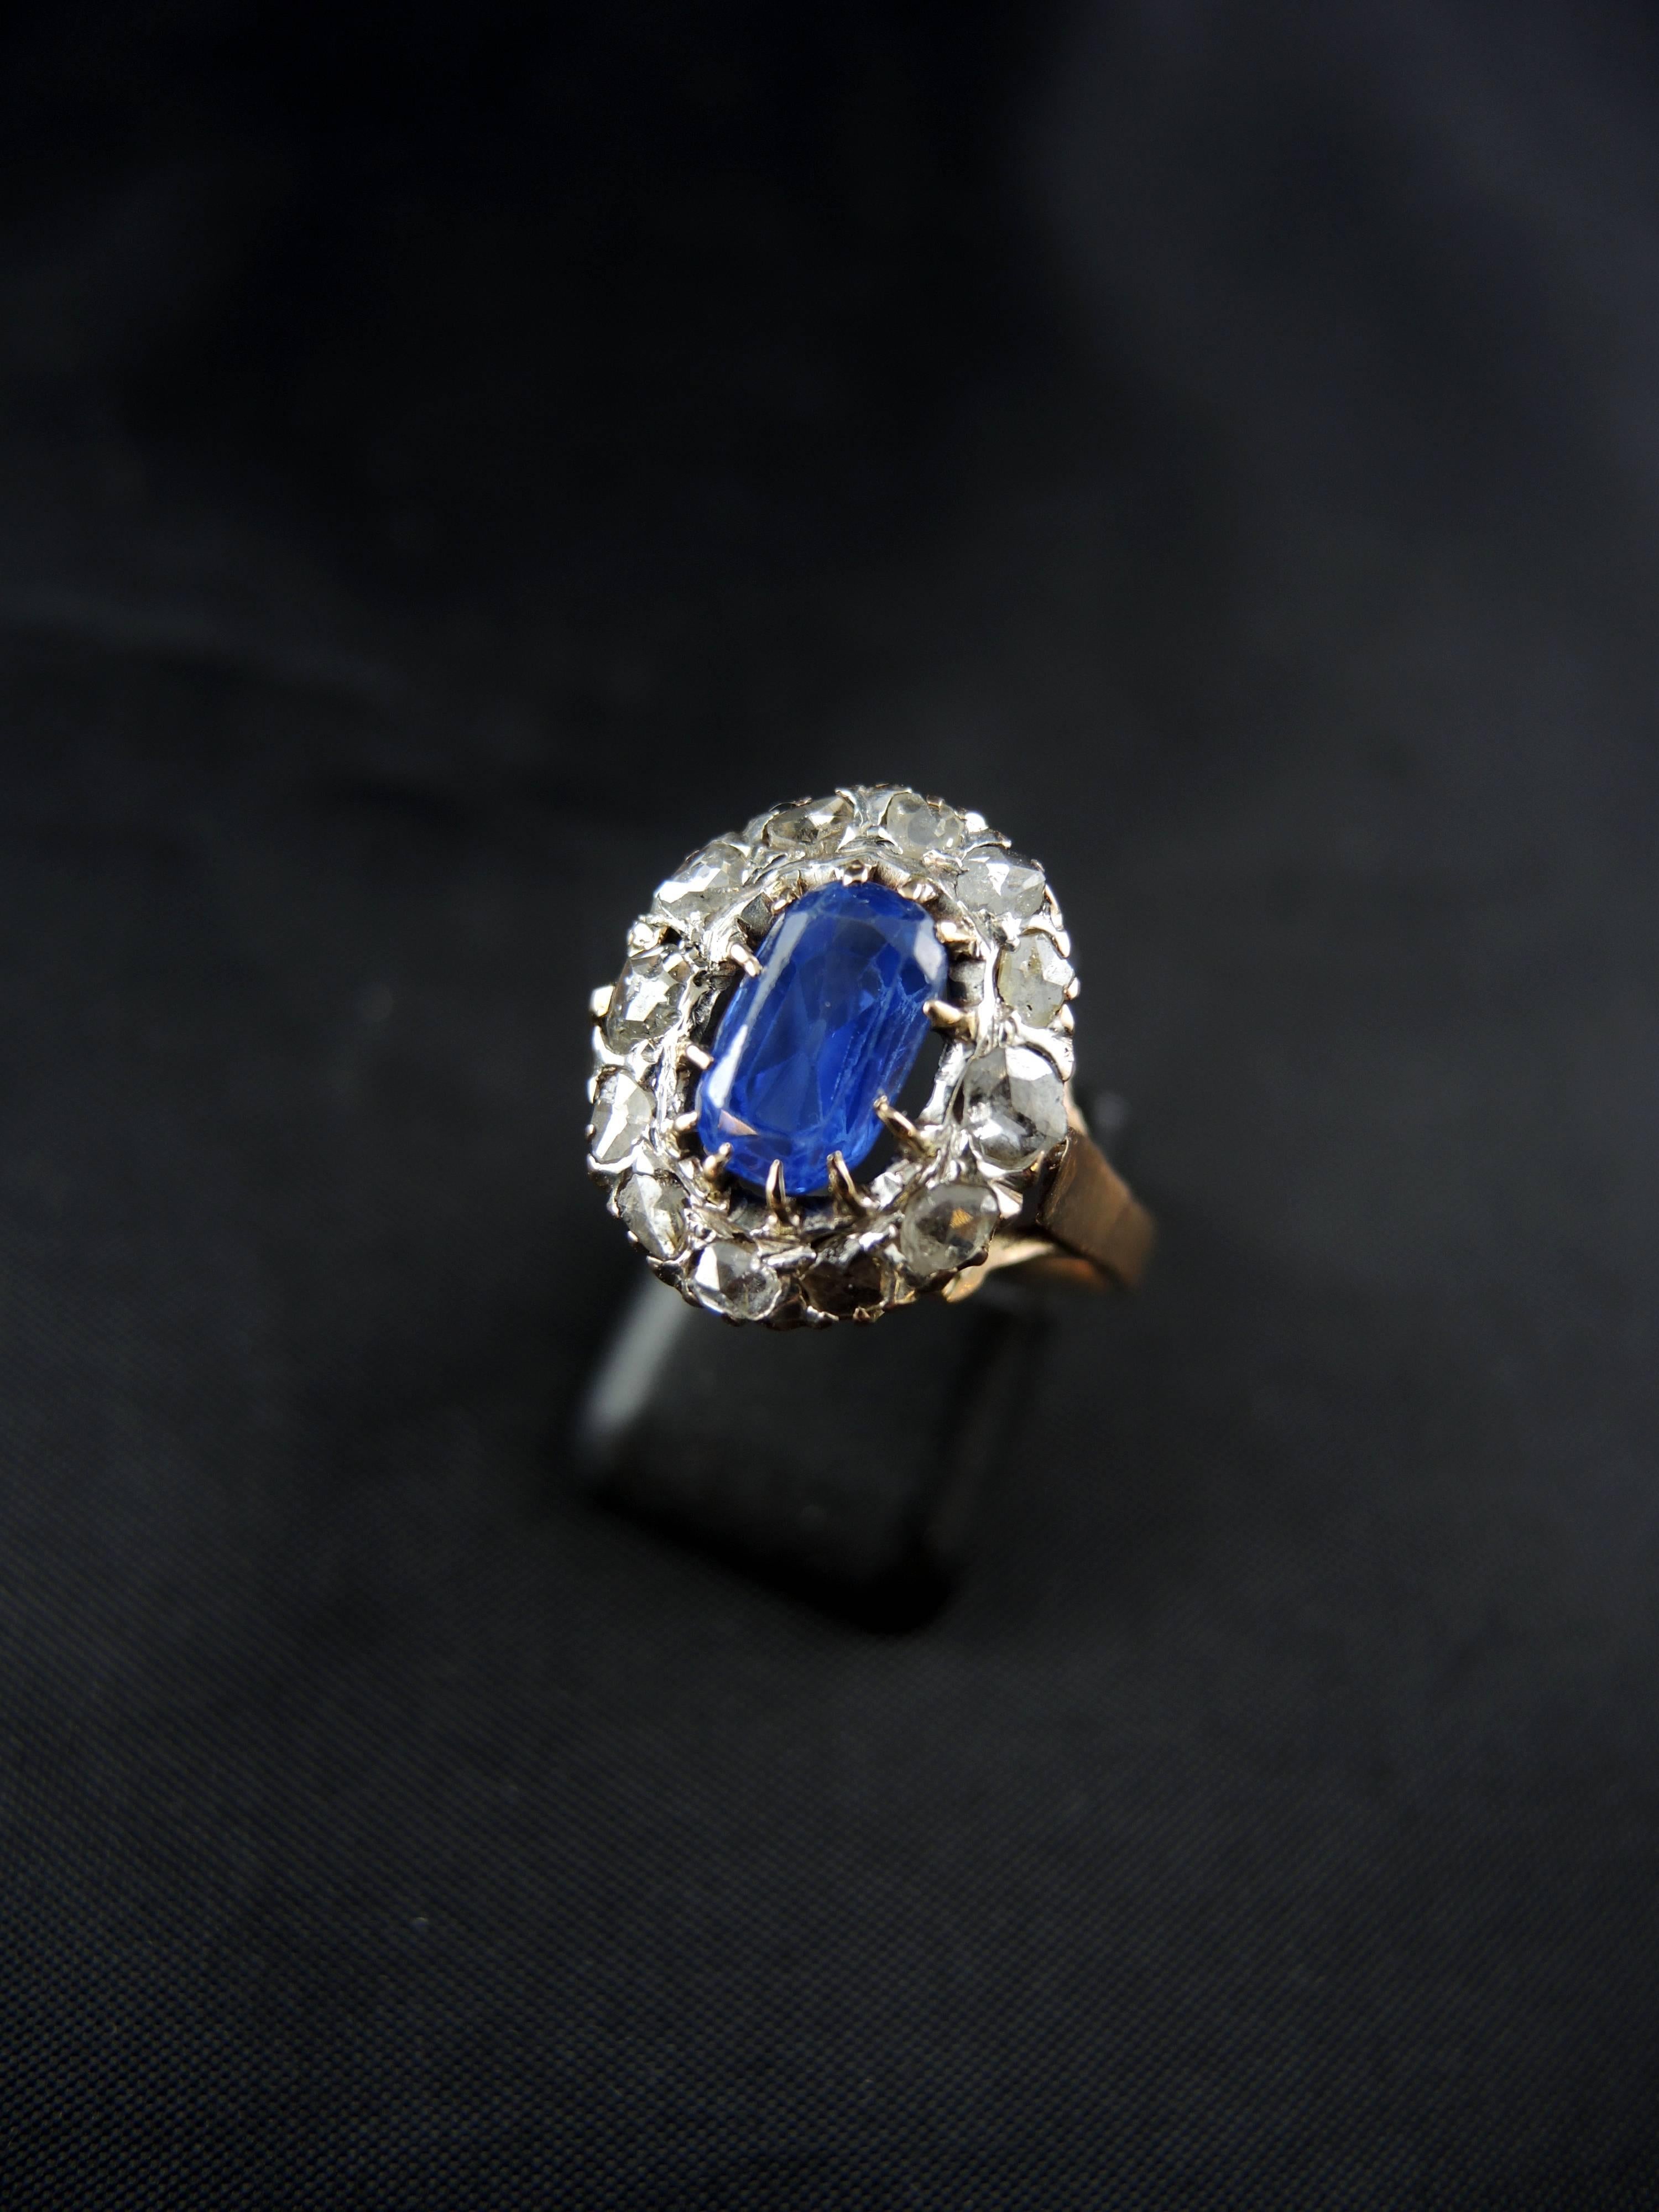 Women's Victorian Engagment Cluster Ring With Sapphire 1.20 Cts And Diamonds 0.60 Ct